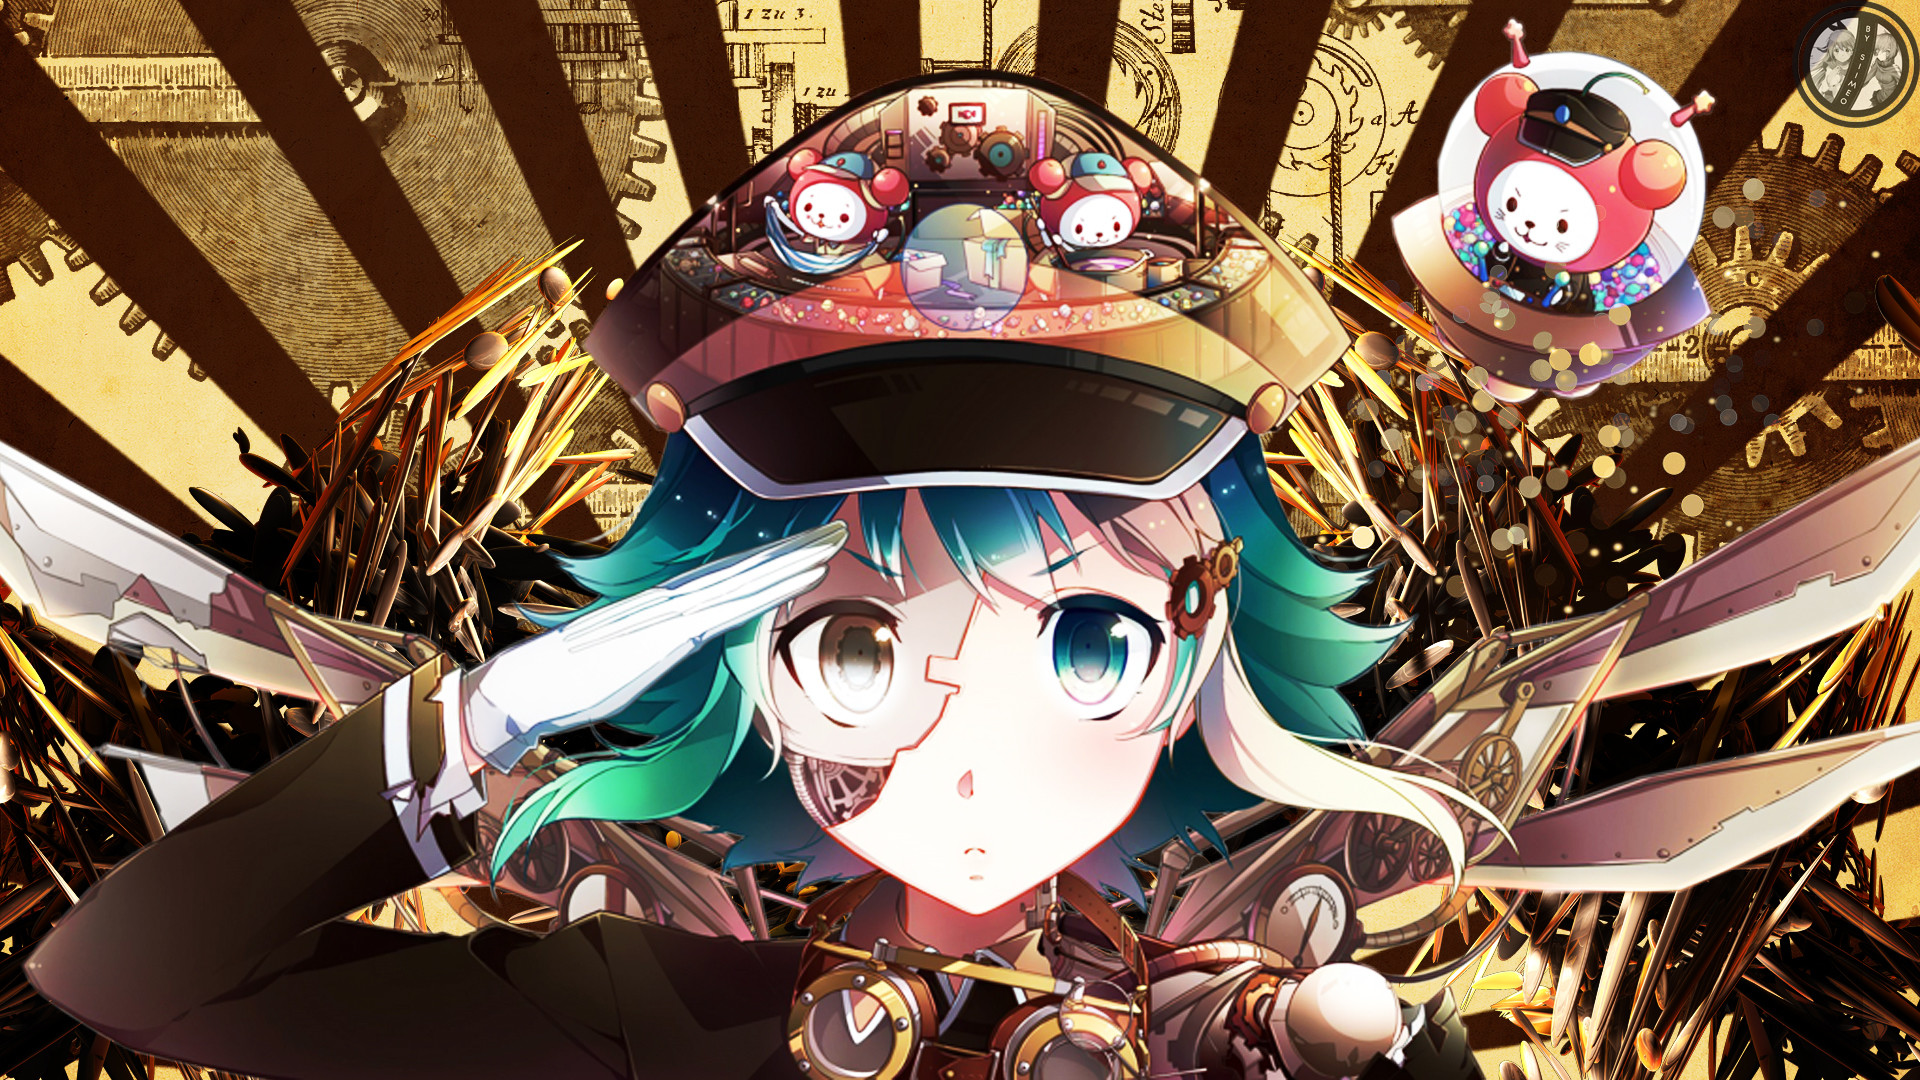 1920x1080 Album of Anime/Steampunk Styled Wallpapers []